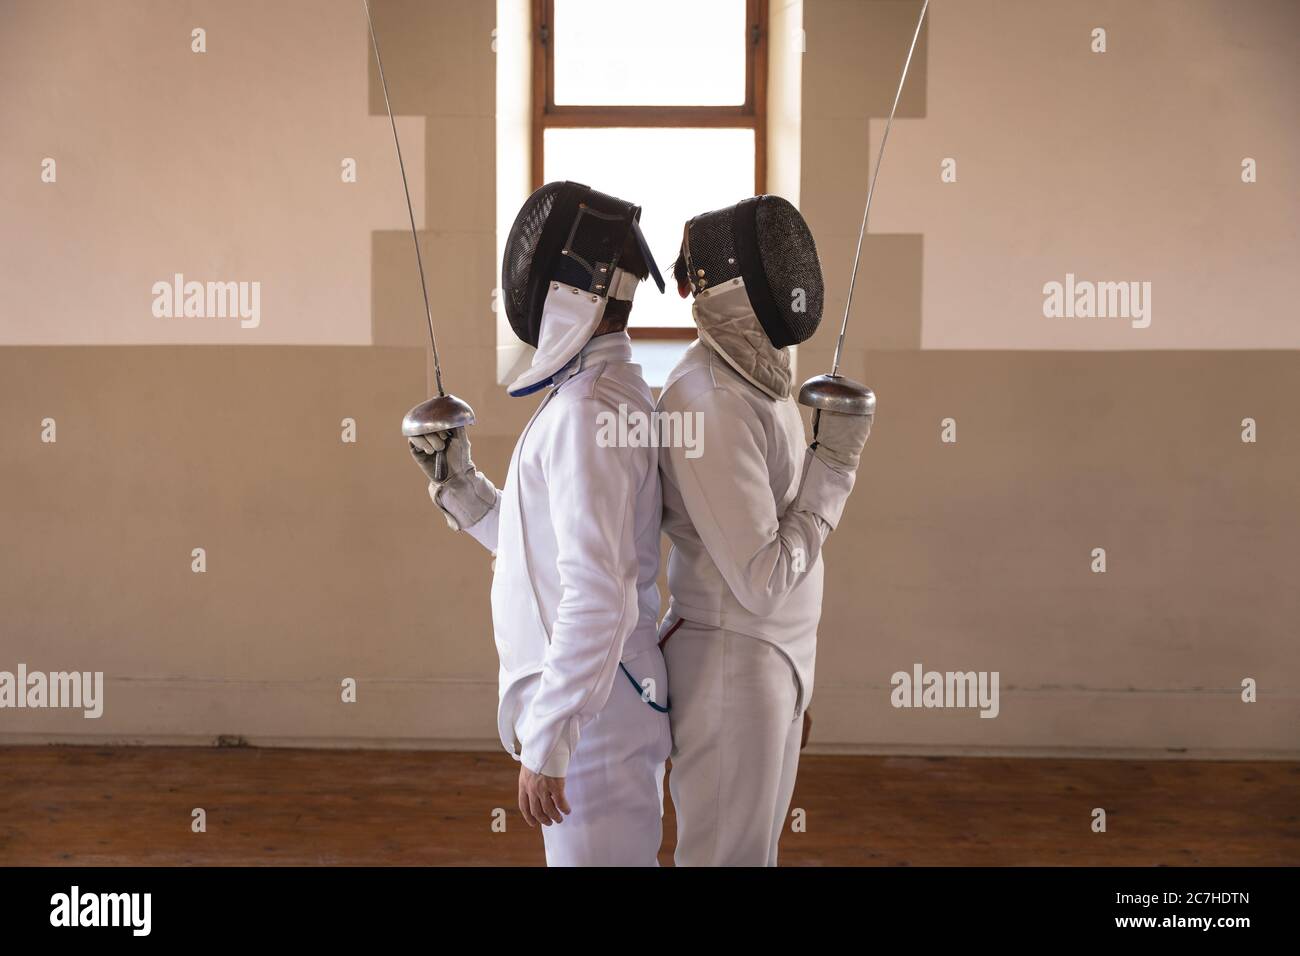 Two female fencers holding fencing foil Stock Photo